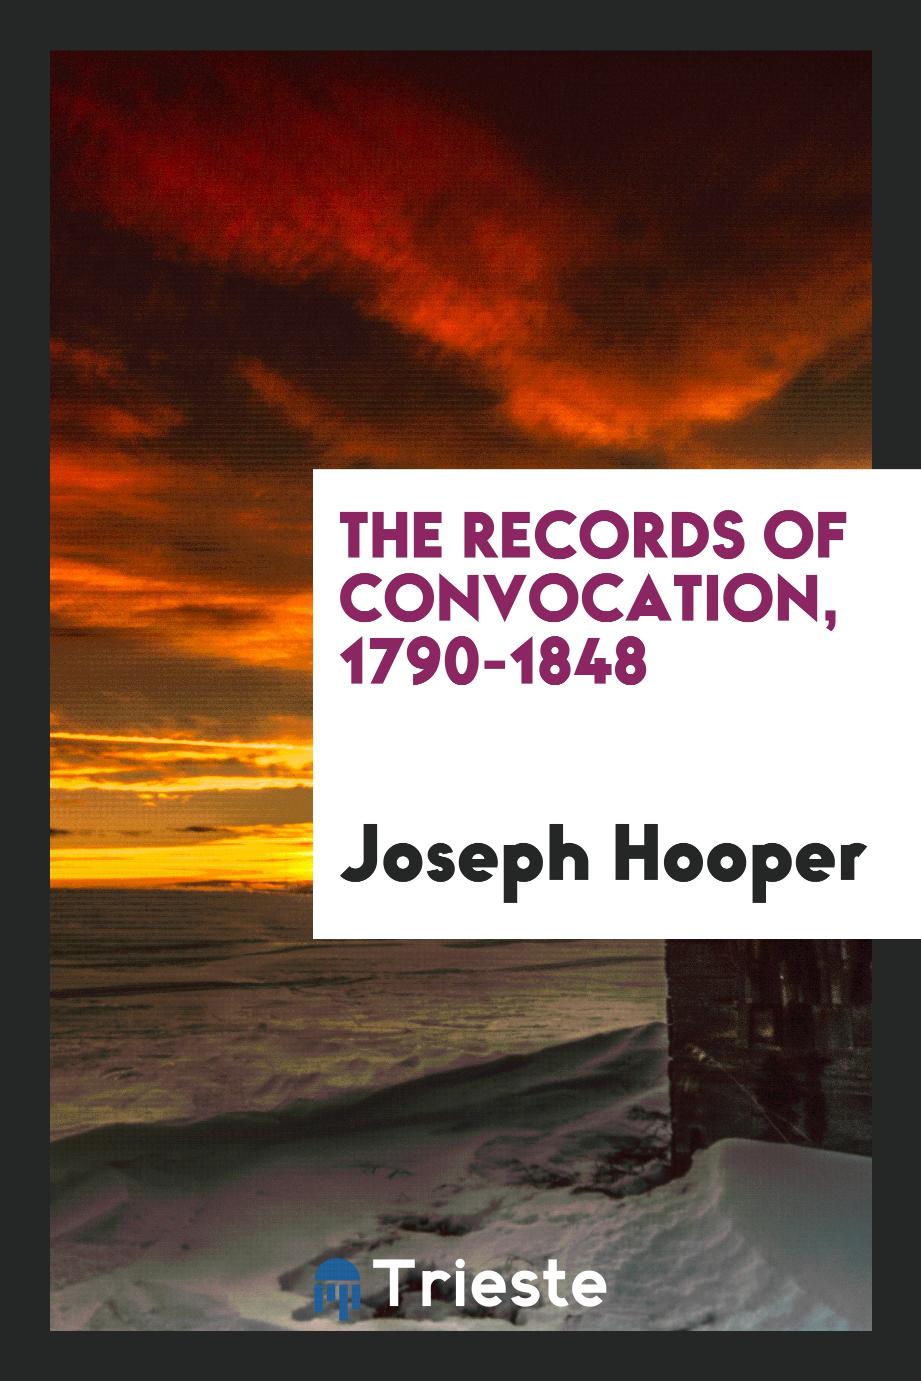 The records of convocation, 1790-1848